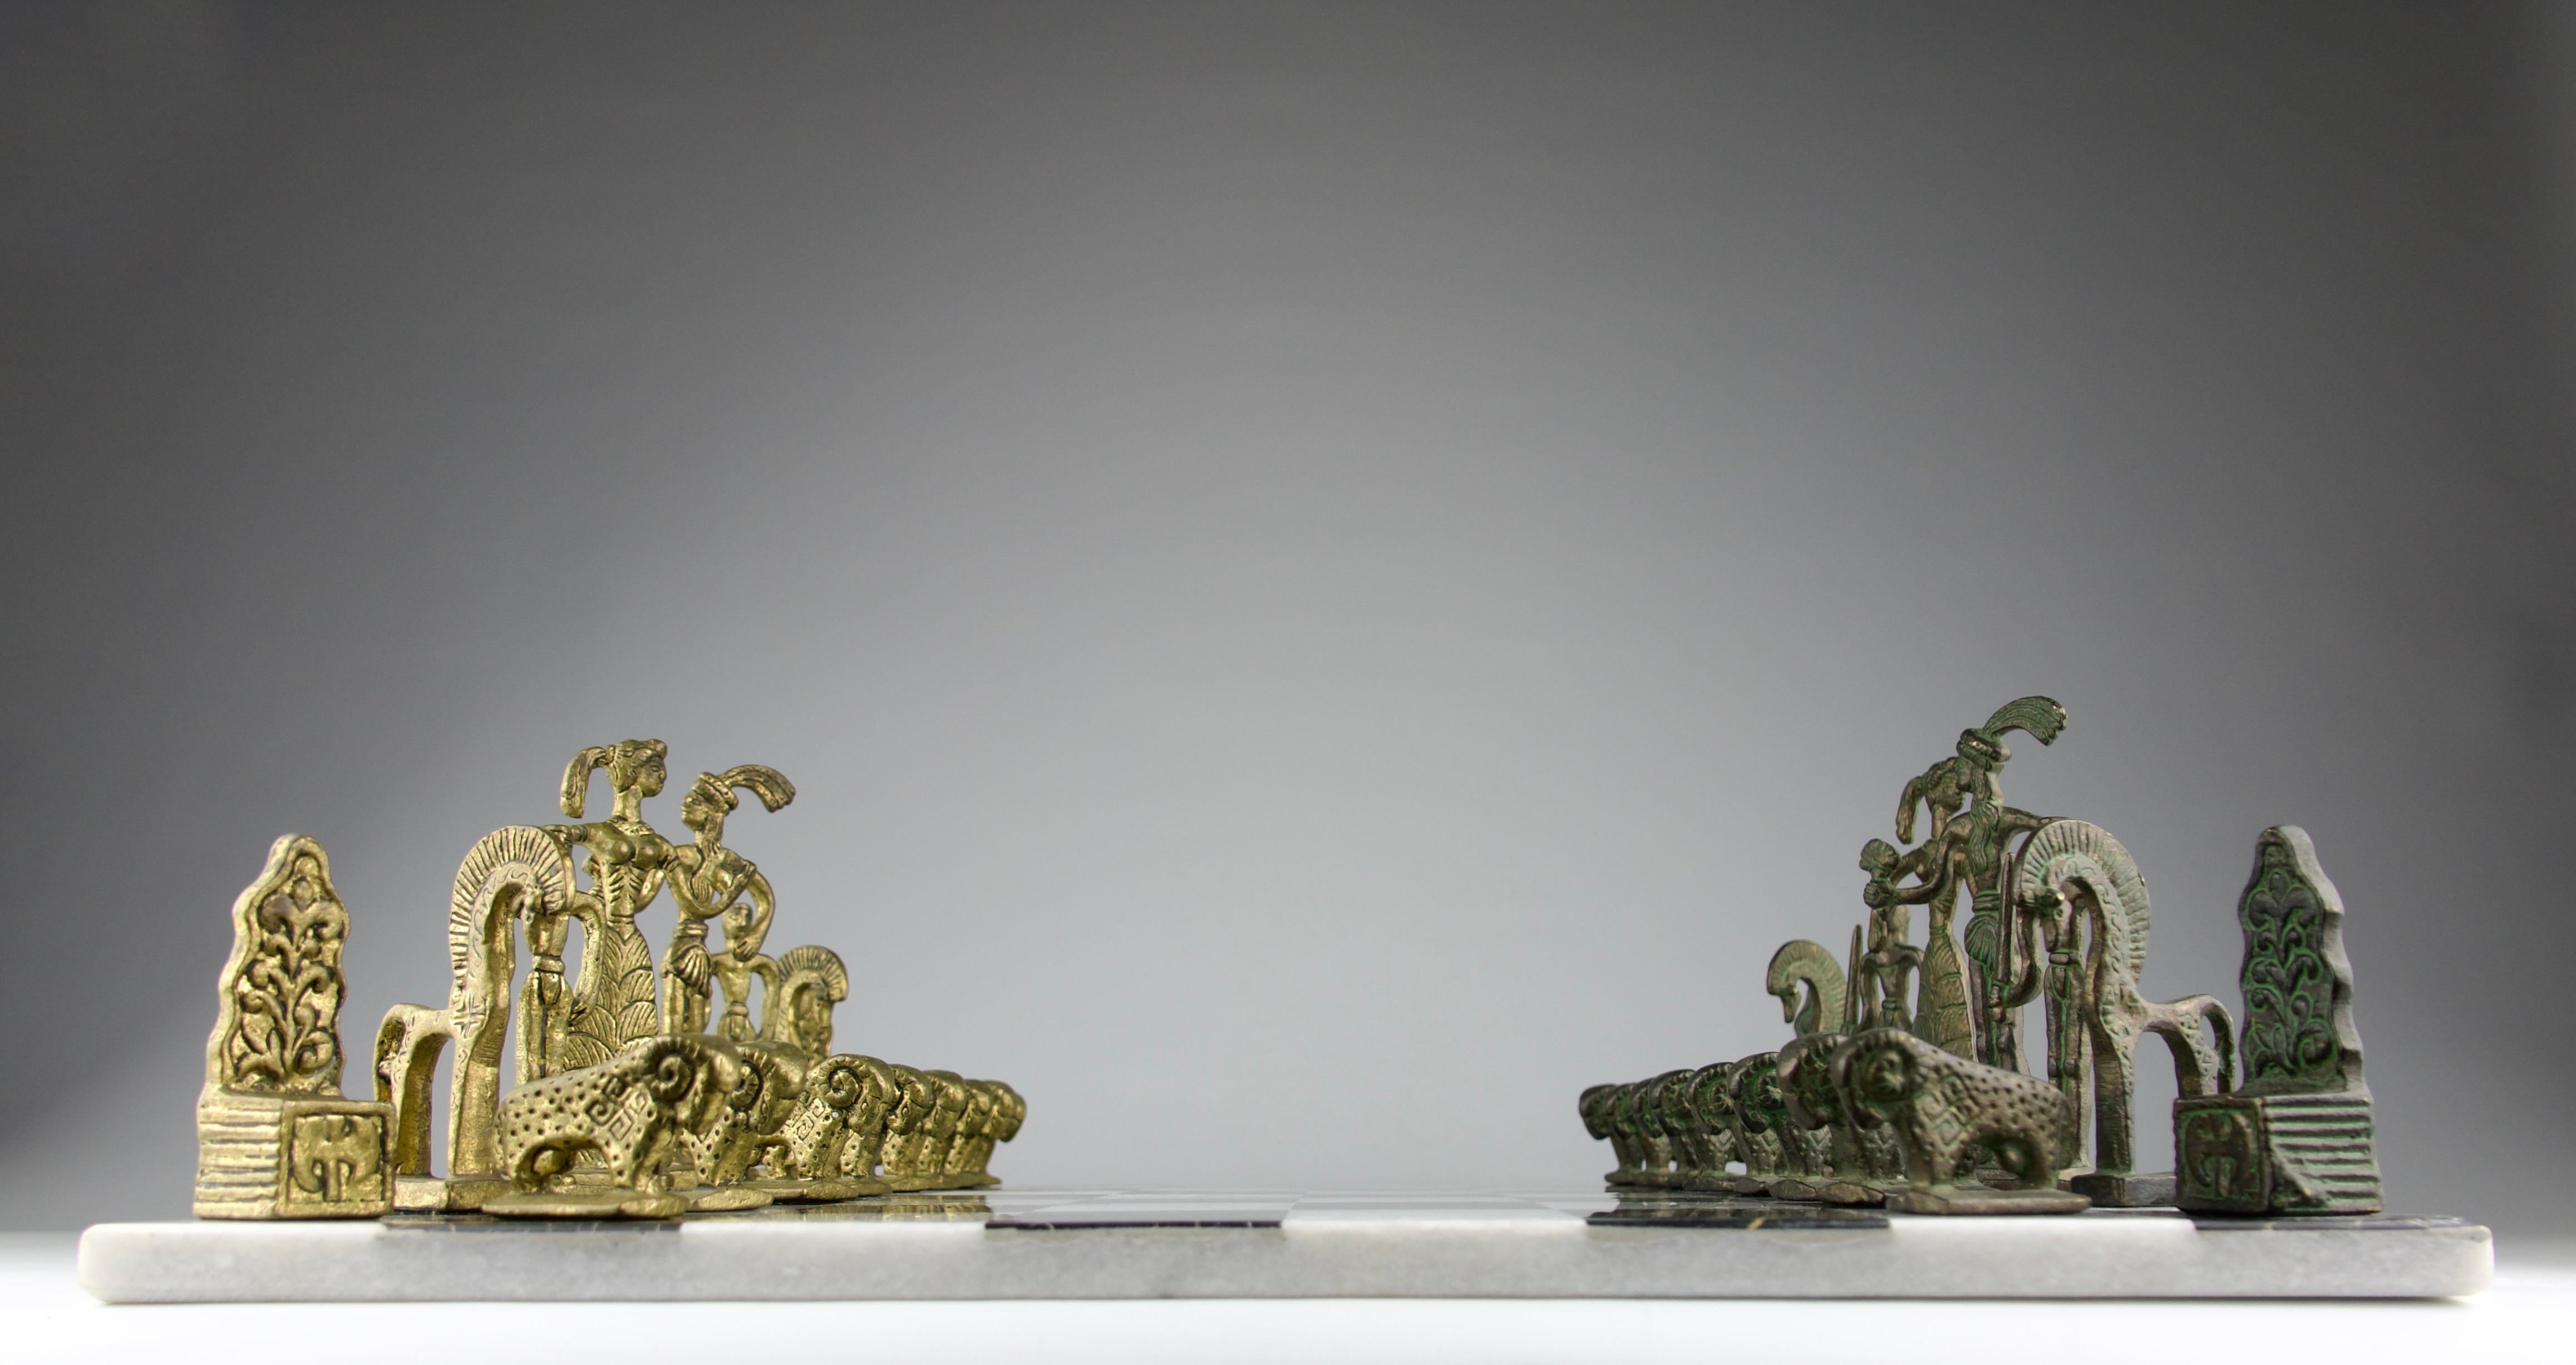 Superb chess set by the artist and designer Frederick Weinberg (1922-1970). Pieces are in patinated bronze and the board is in marble.

Very good condition.

Secure shipping.

Philadelphia based artist and industrial designer Frederic Weinberg